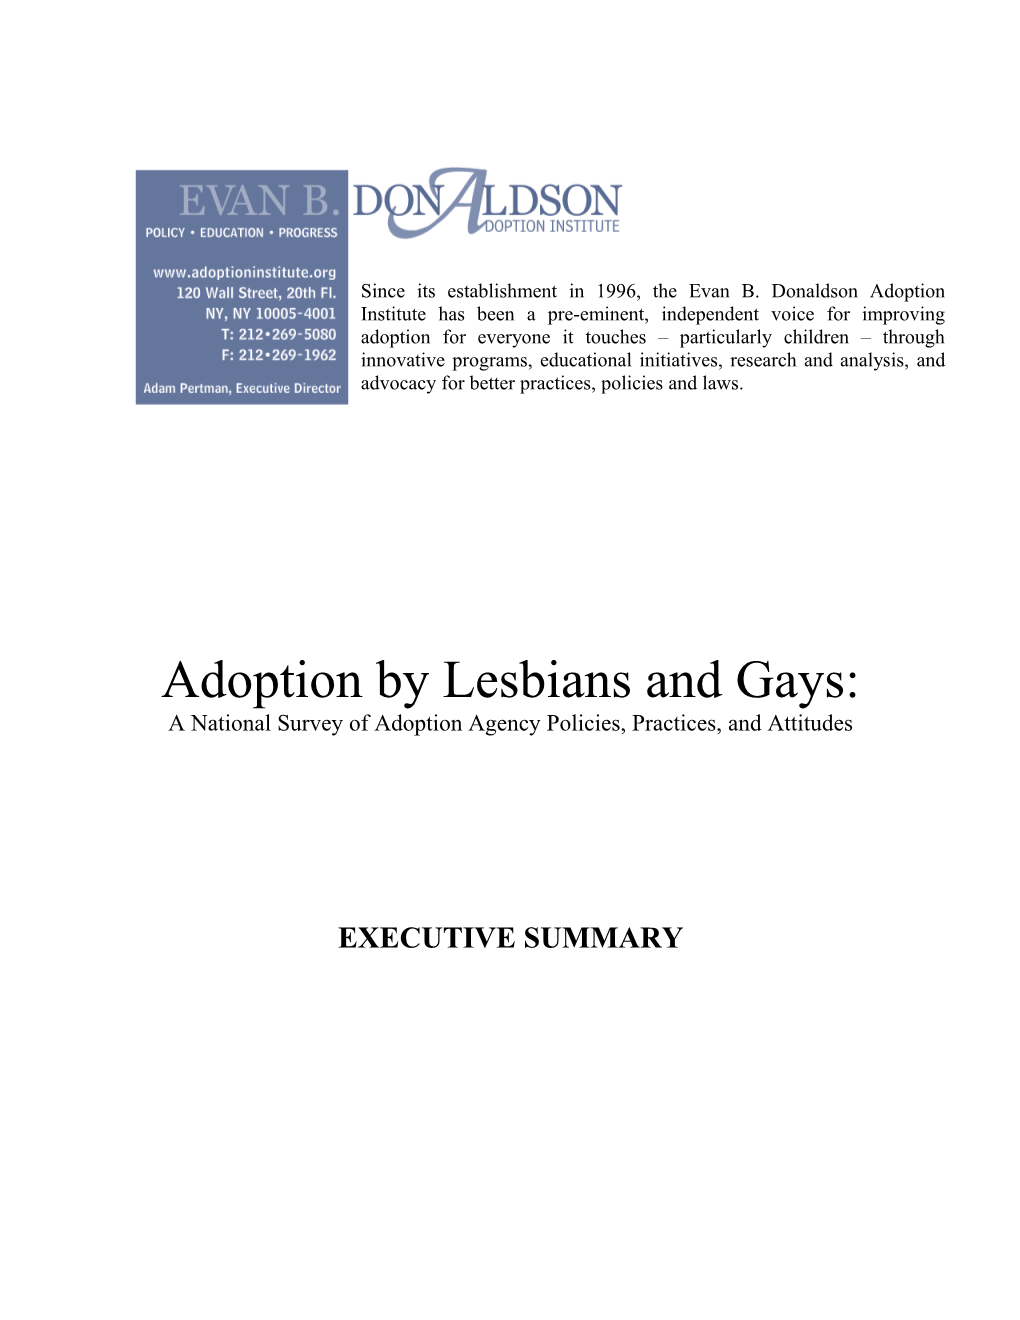 A National Survey of Adoption Agency Policies, Practices, and Attitudes